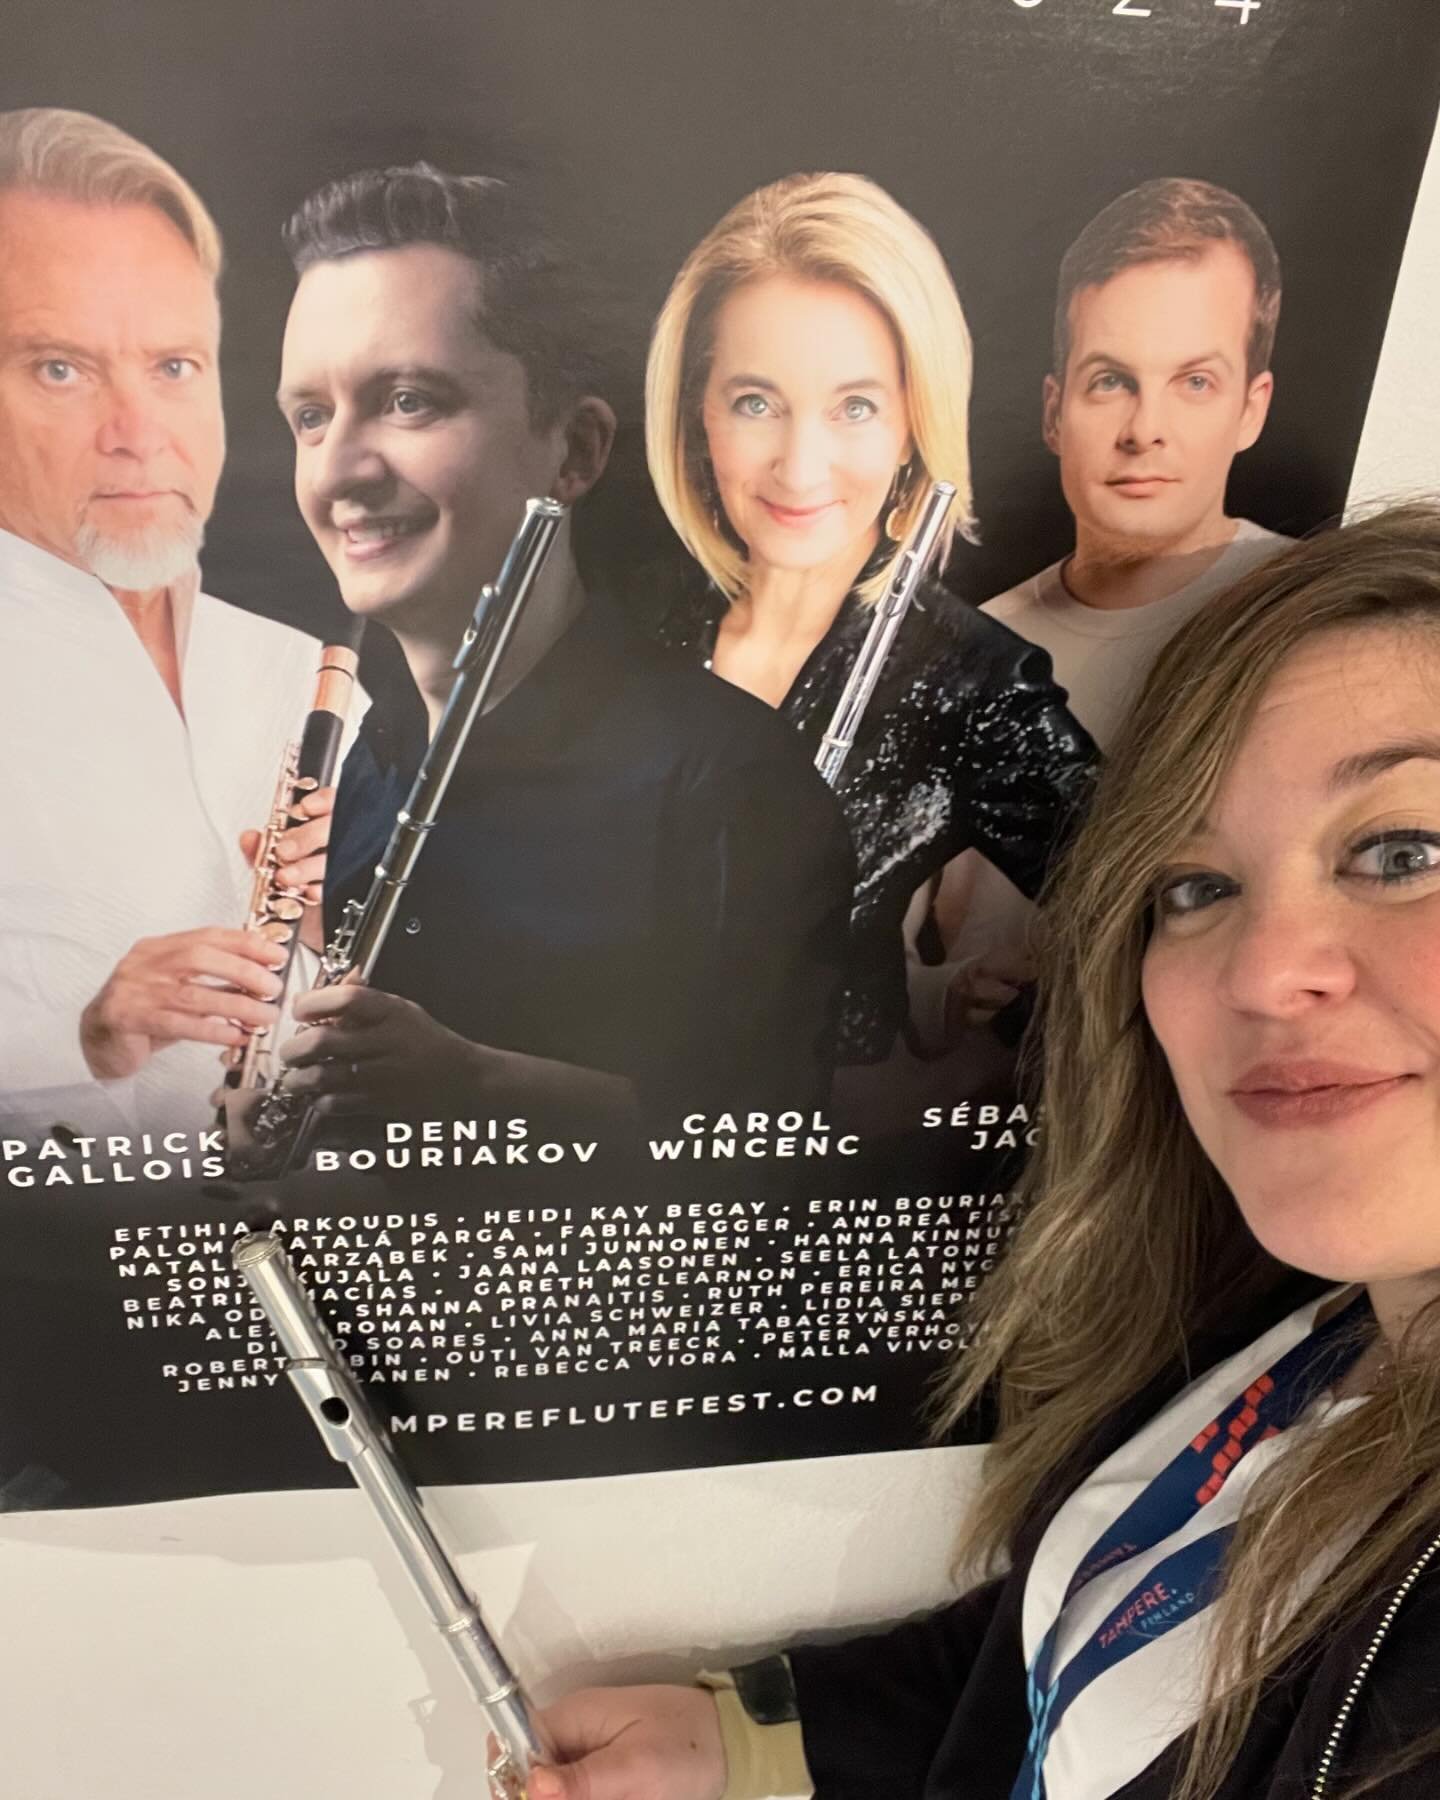 The @tampereflutefest has easily won my heart as one of the best festivals for flute there is right now. 

It has been a privilege to serve as 2024 Tampere Flute Fest: LEGENDS Global Outreach Coordinator alongside an incredible team of humans, whose 